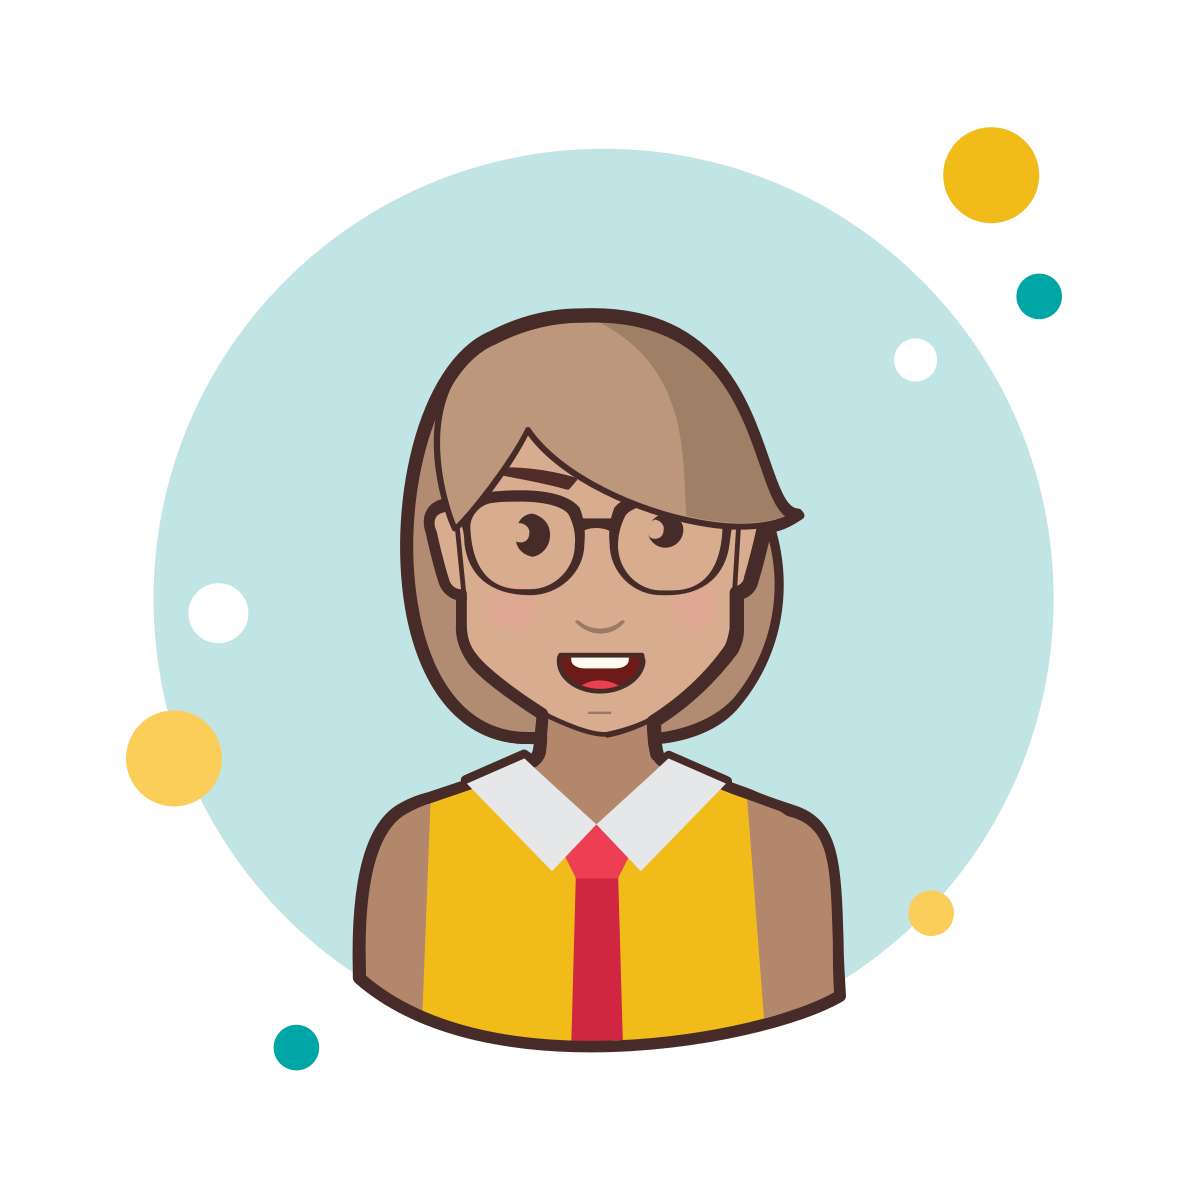 Short Hair Business Lady With Glasses icon in Bubbles Style